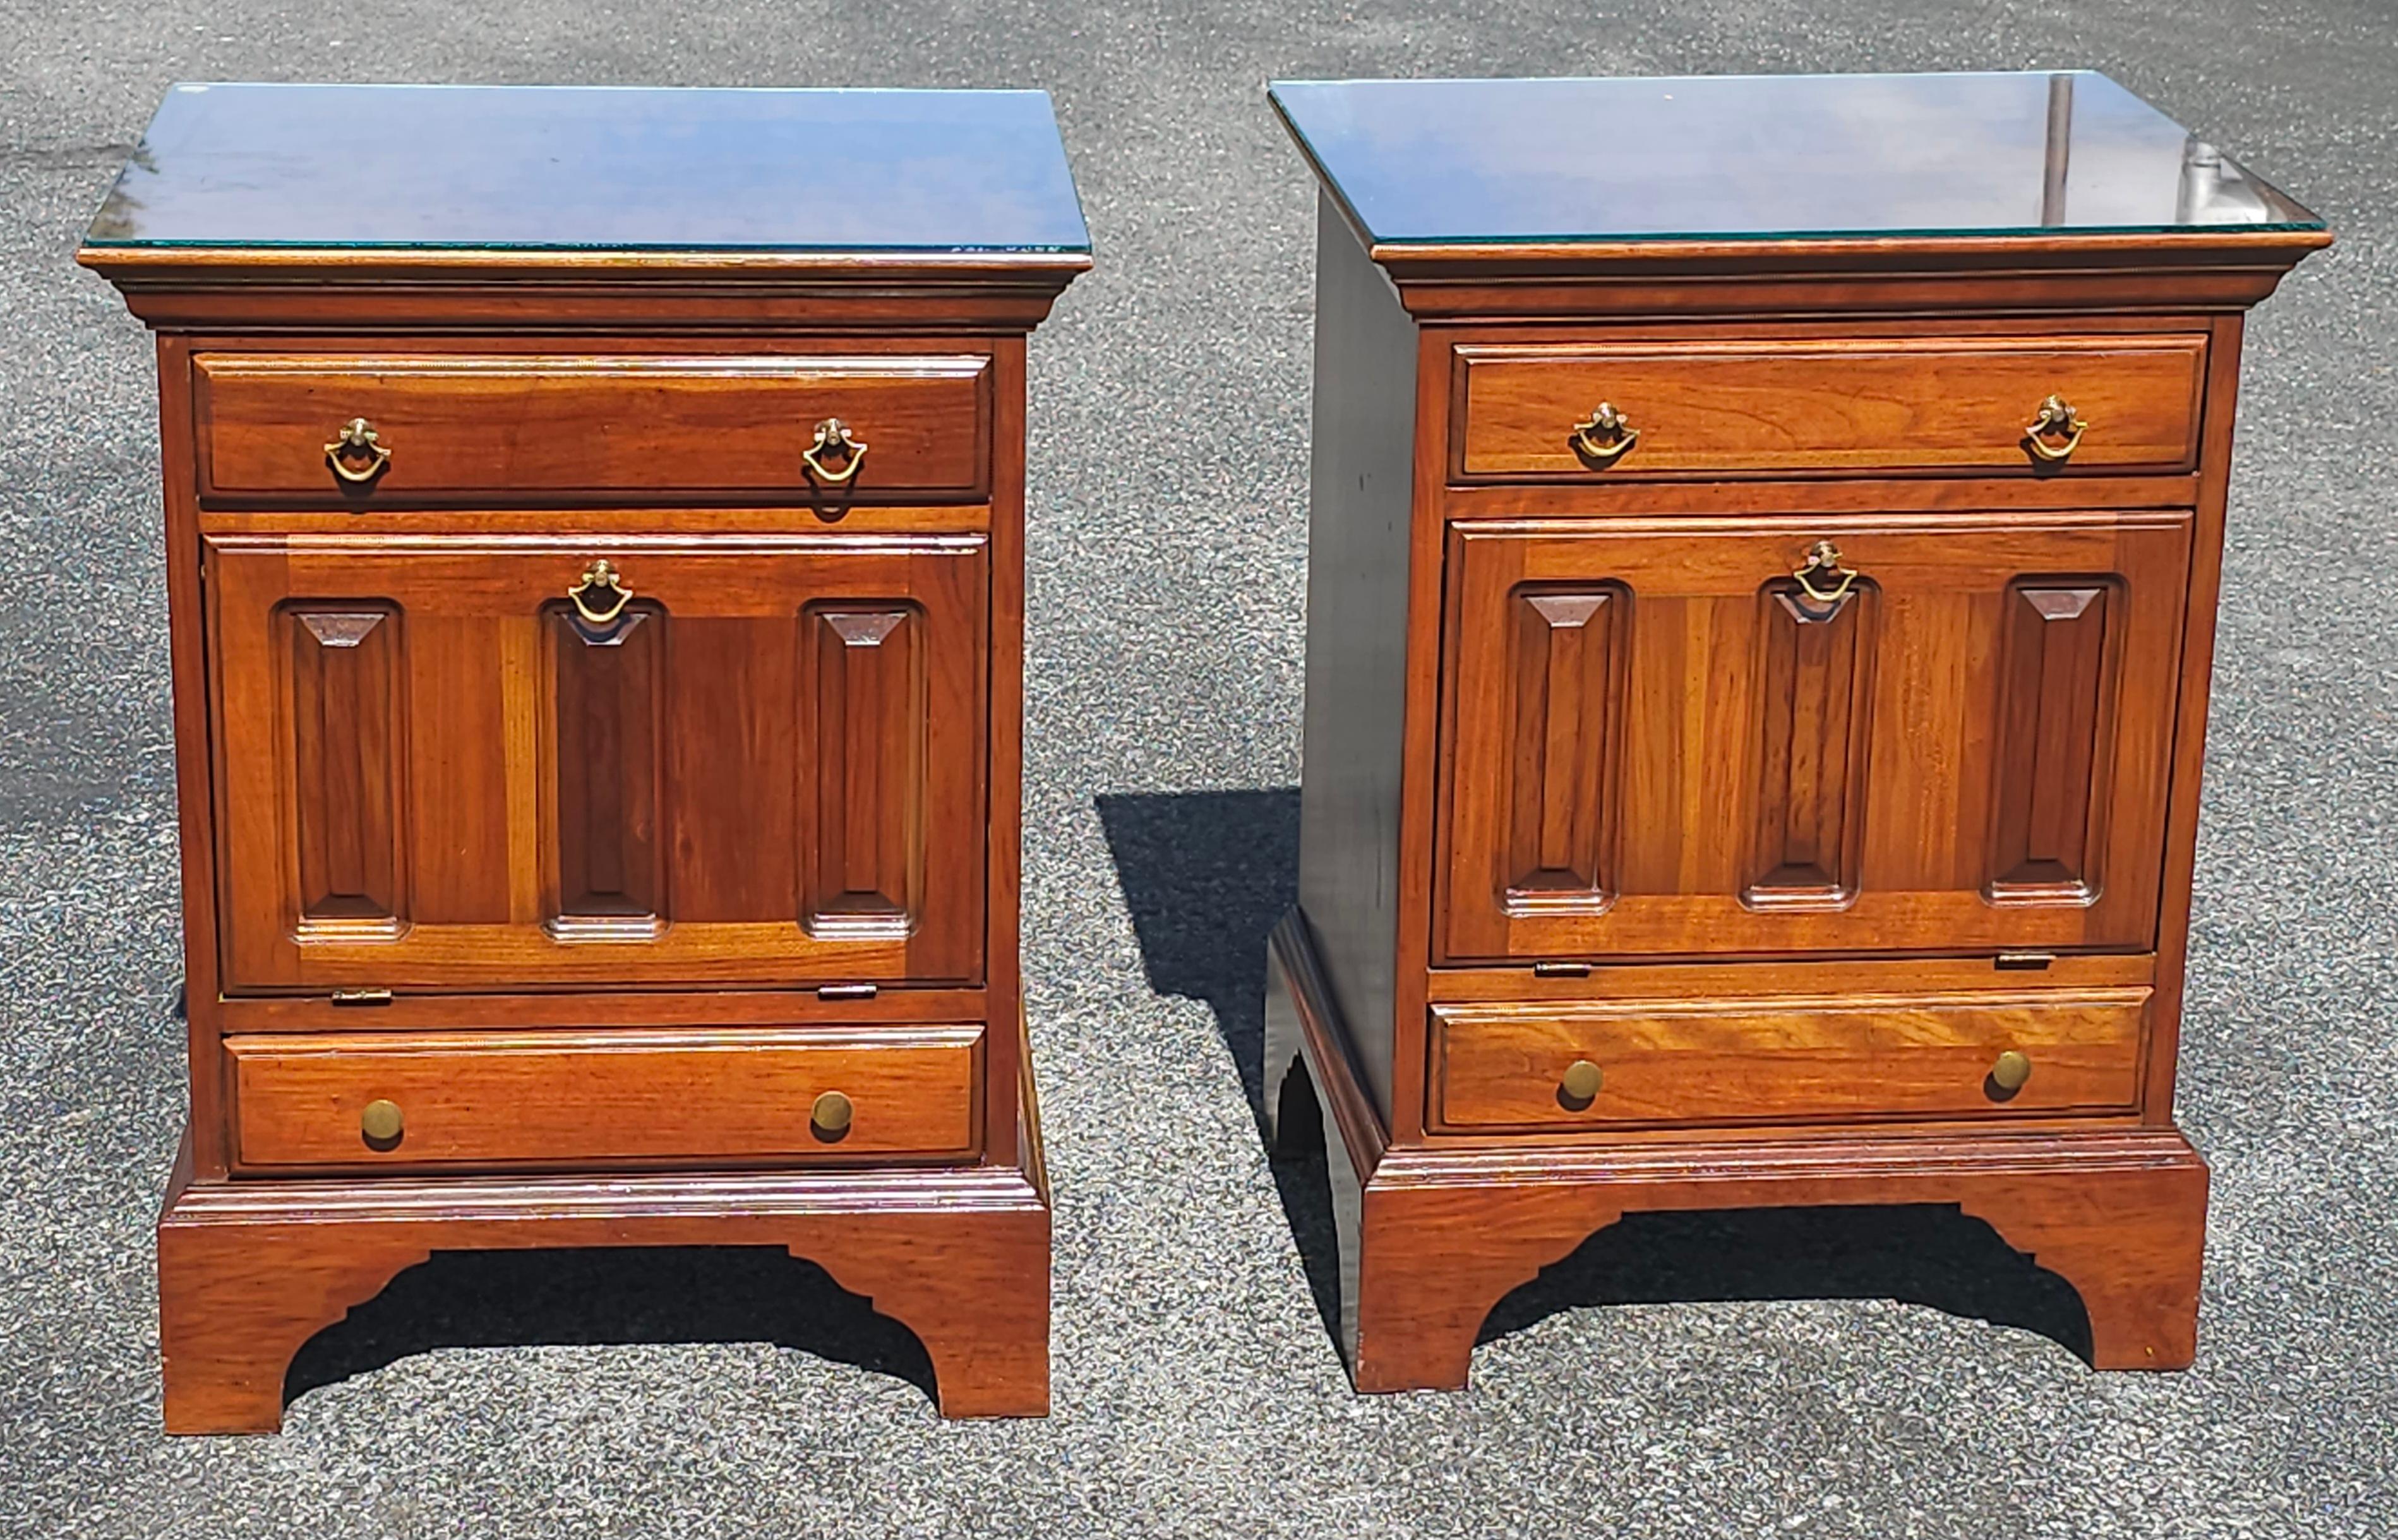 Modern 20th Century David Cabinet Cherry 2-Drawer a Abattant Door Bedside Cabinets Pair For Sale